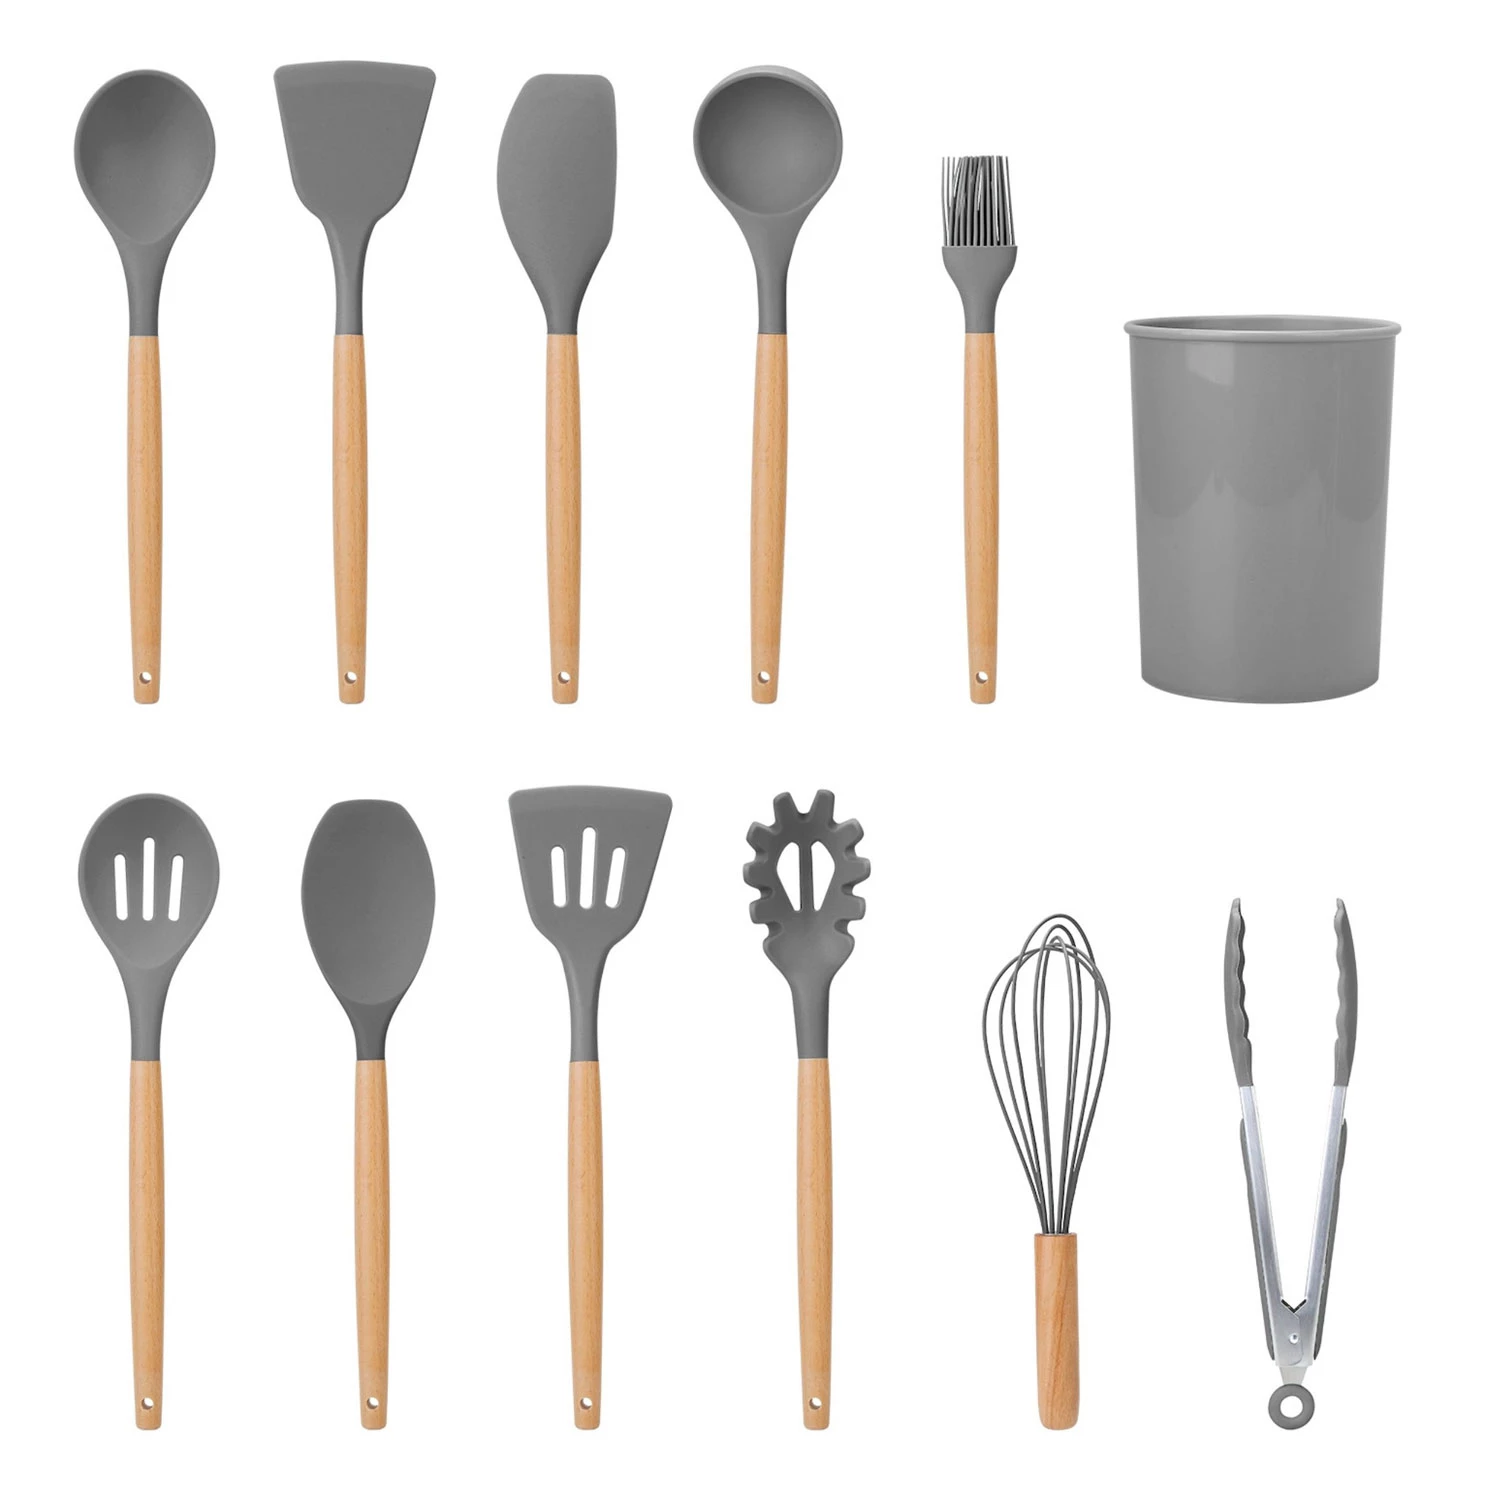 11-piece Silicone Cooking Utensil Set With Heat-resistant Wooden Handle - Spatula, Turner, Ladle